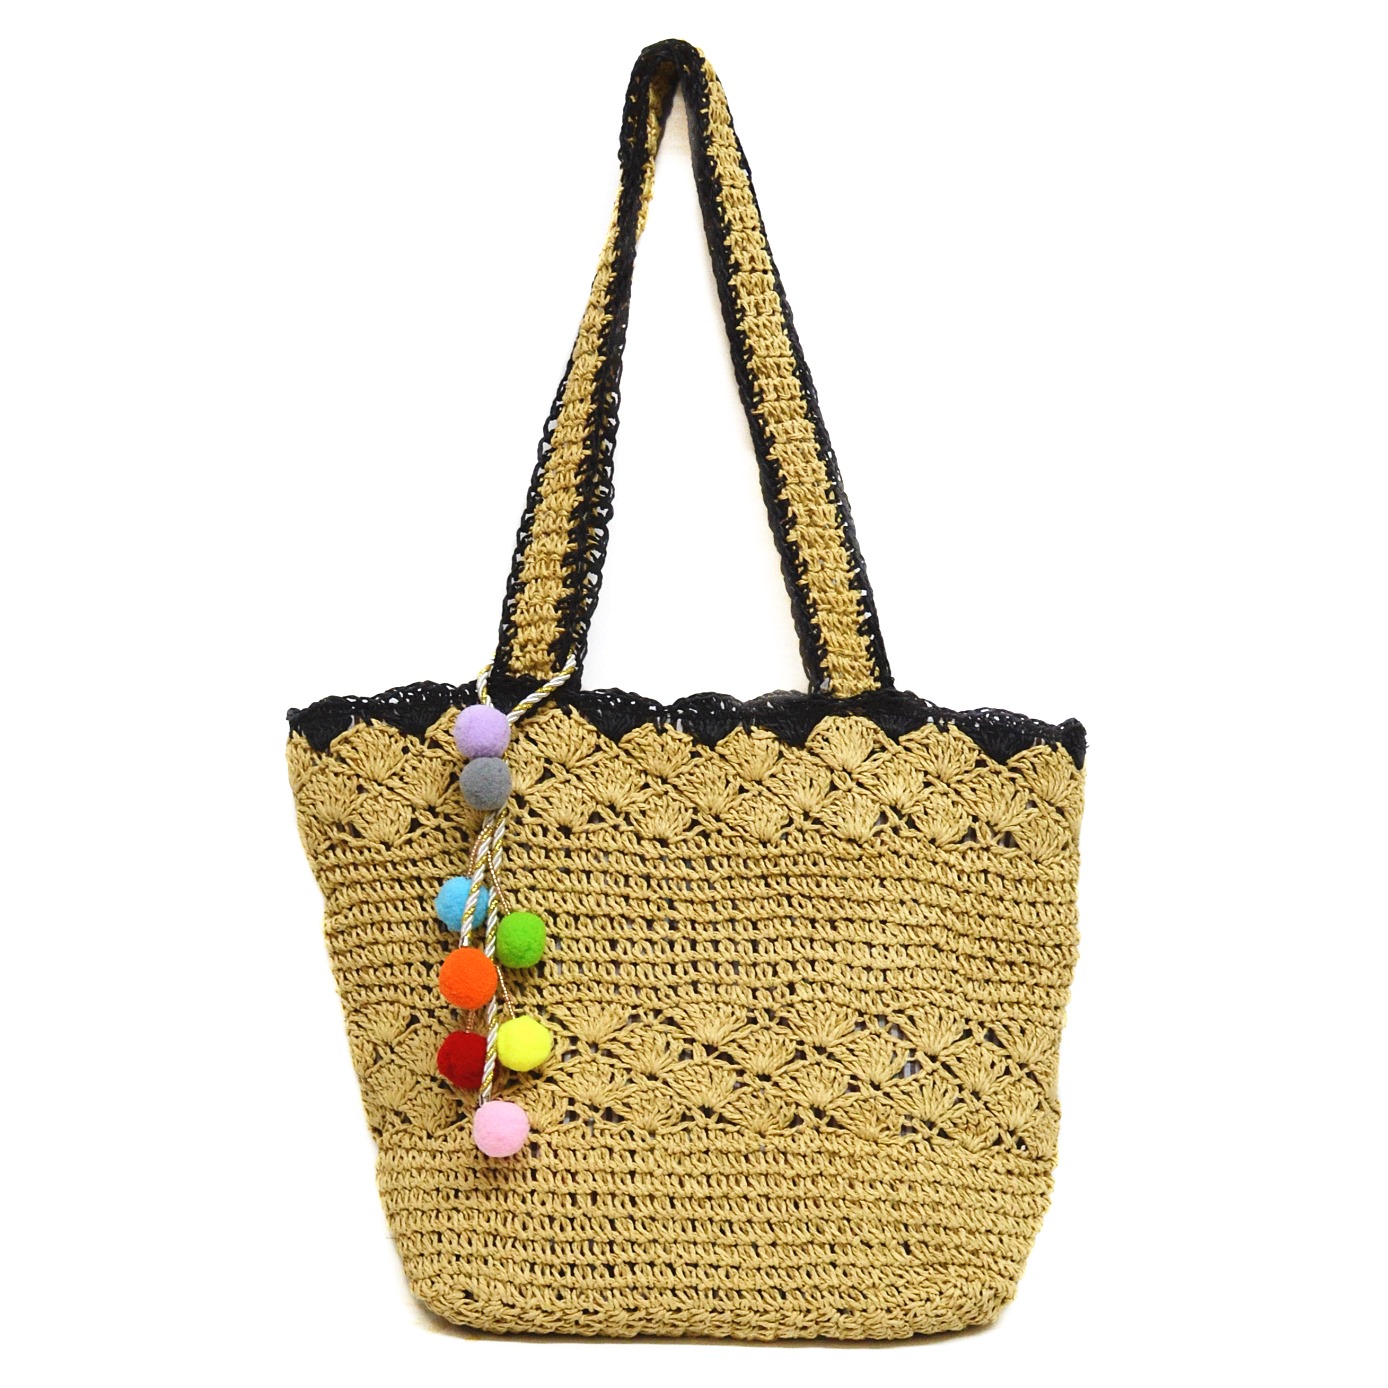 Straw Woven Tote with Pom Charms | 438010-210 | eSwanNY